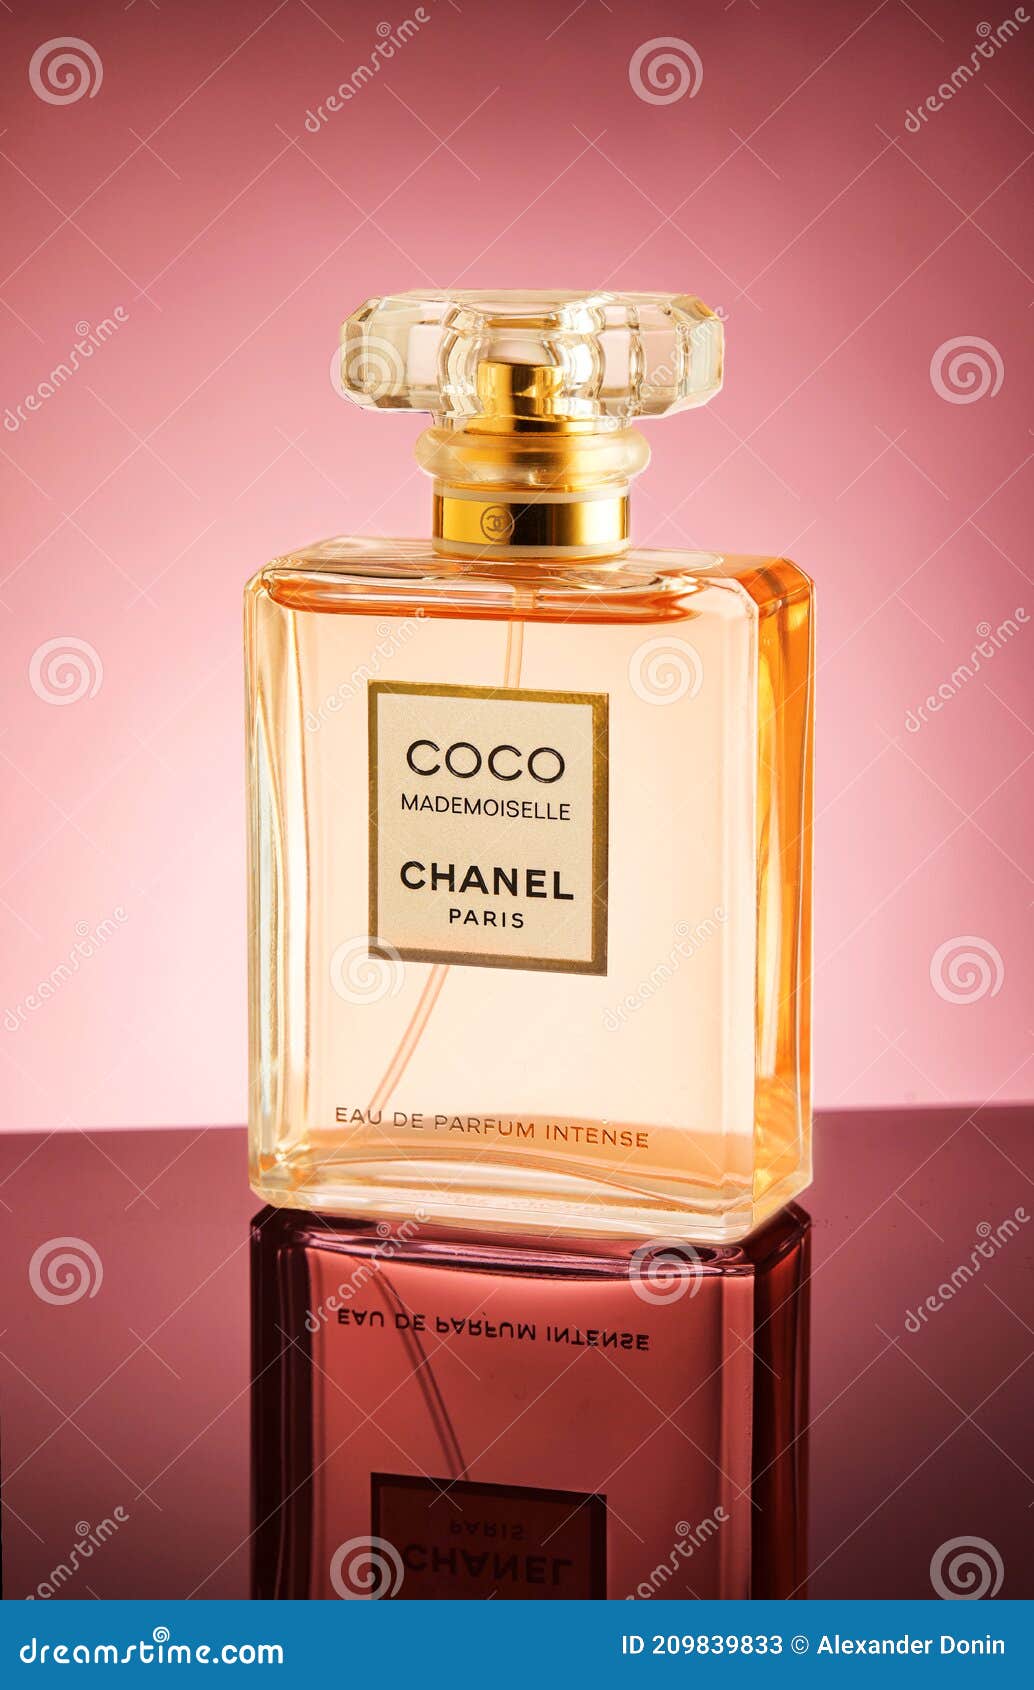 French Perfume Chanel Coco Mademoiselle. Editorial Stock Photo - Image ...